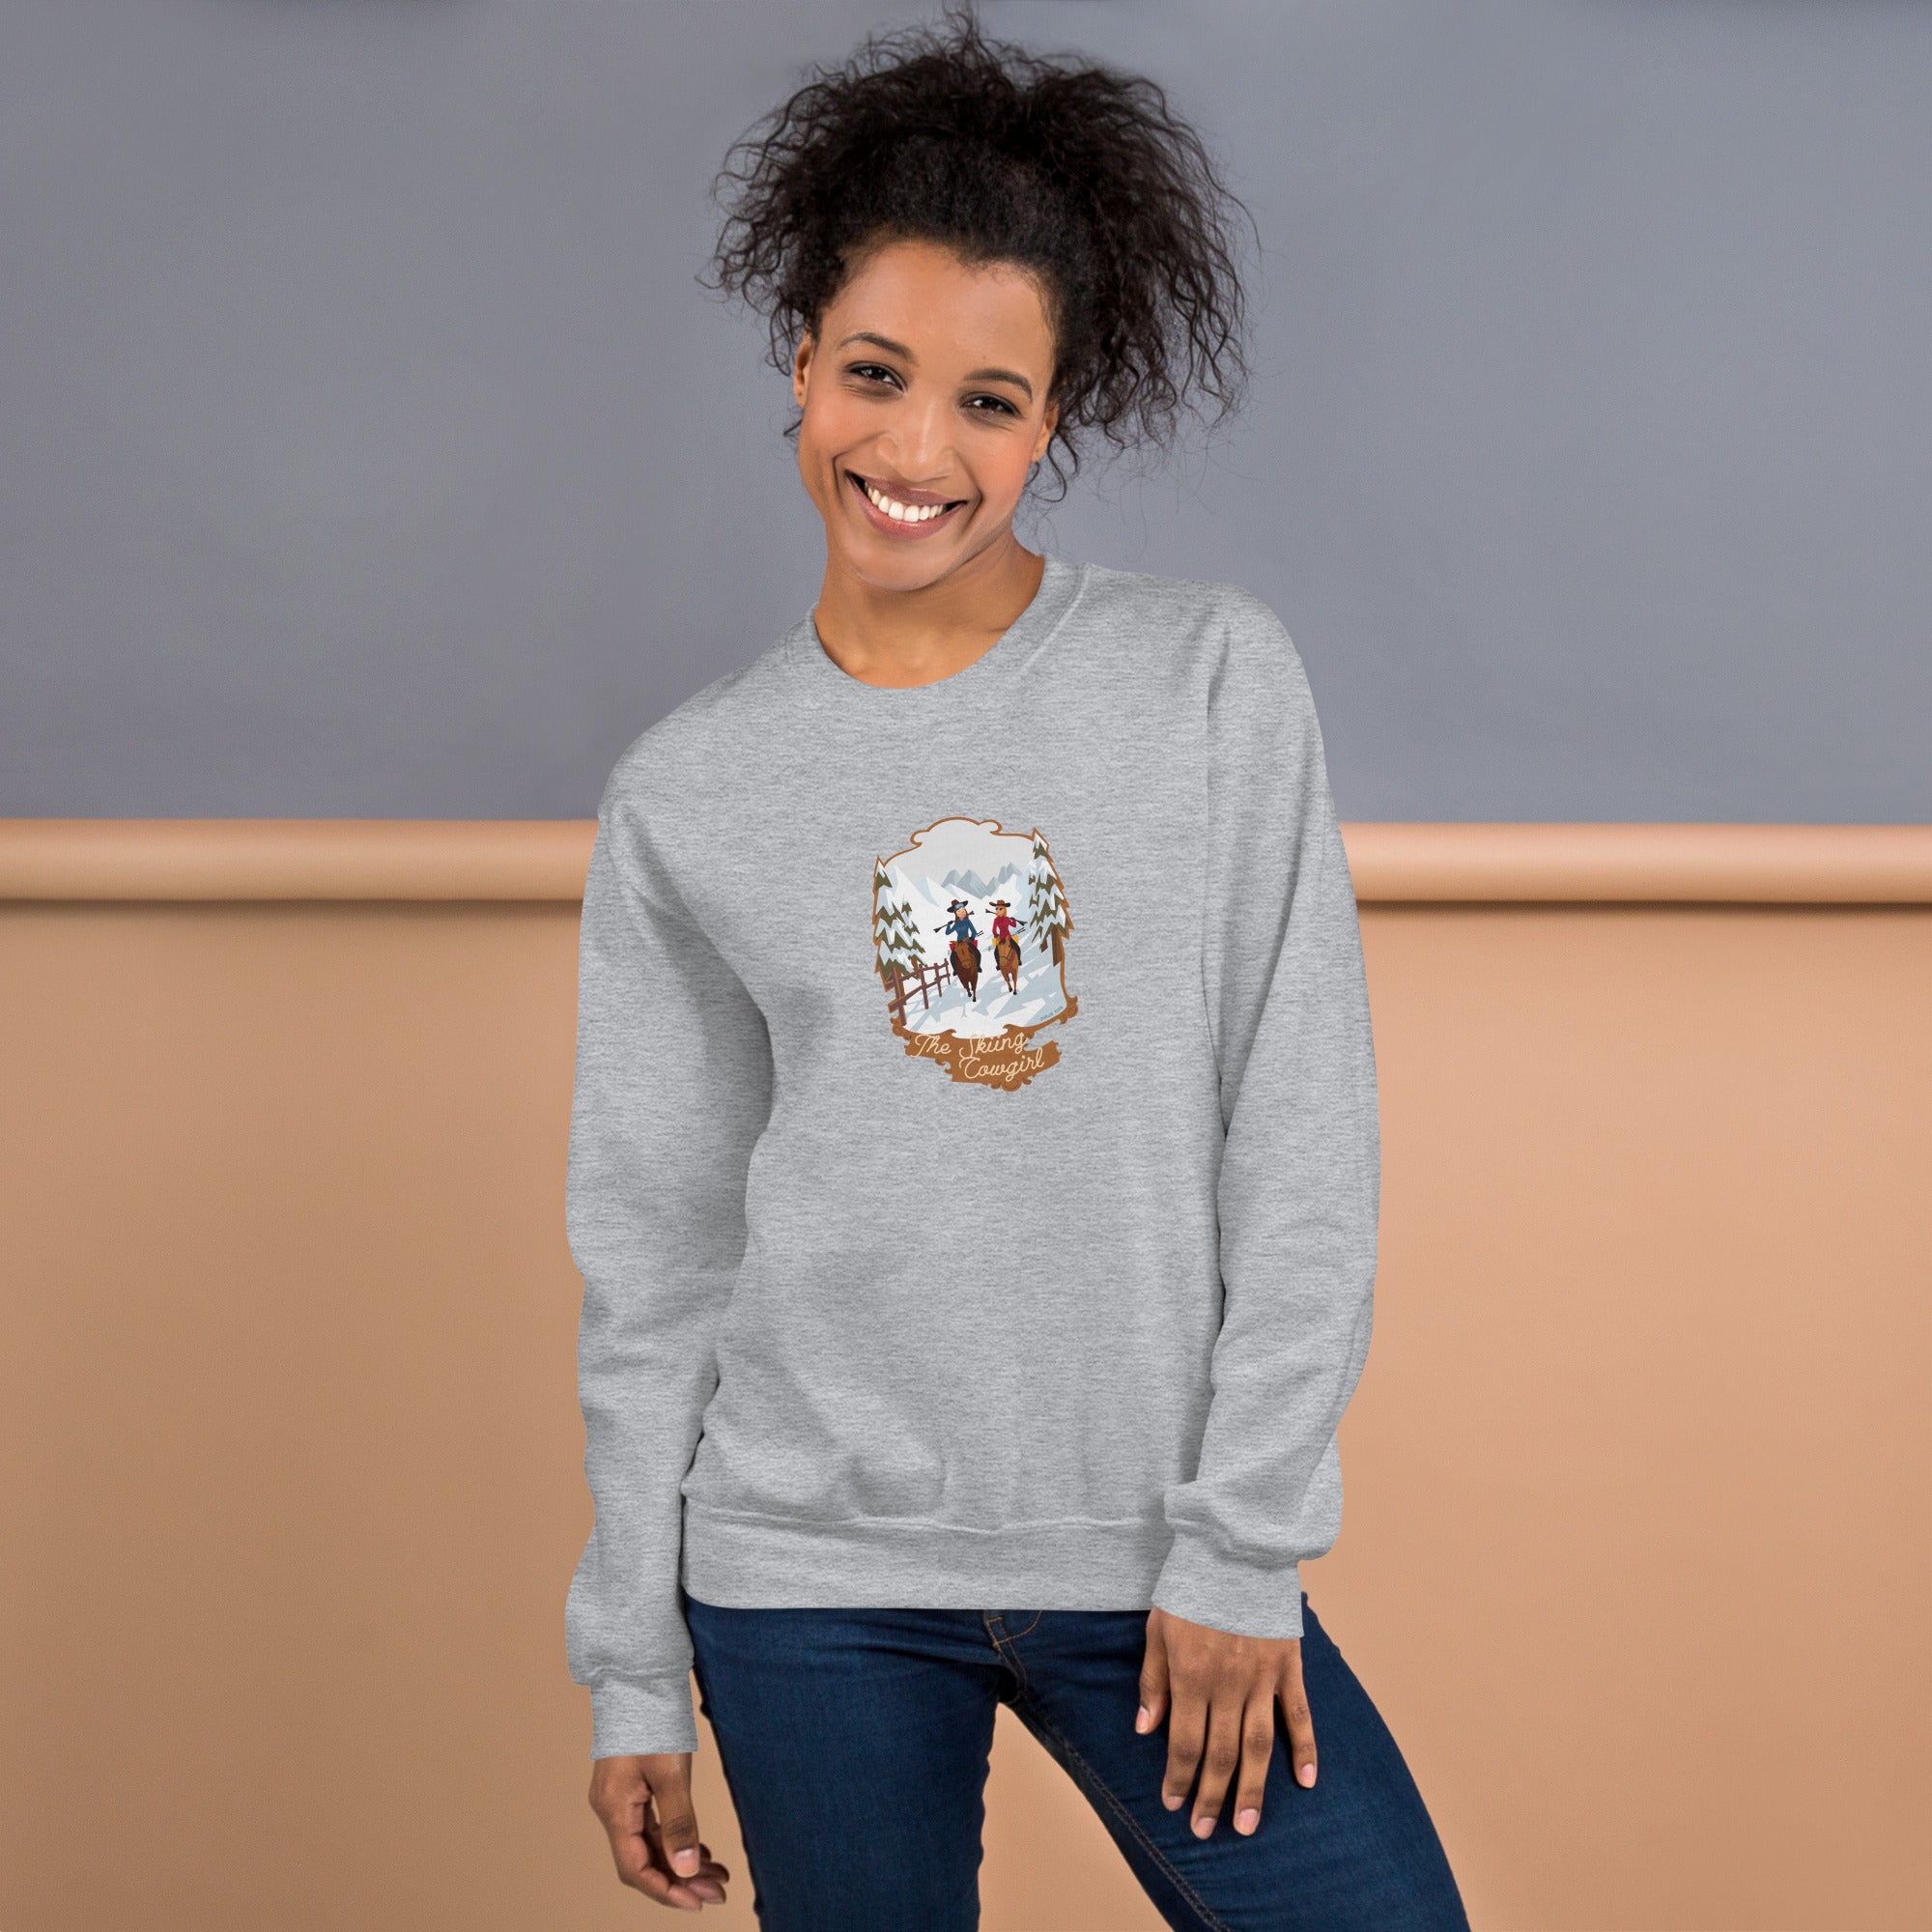 Sweat Unisexe à Col Rond The Skiing Cowgirl (face & dos) sur couleurs claires